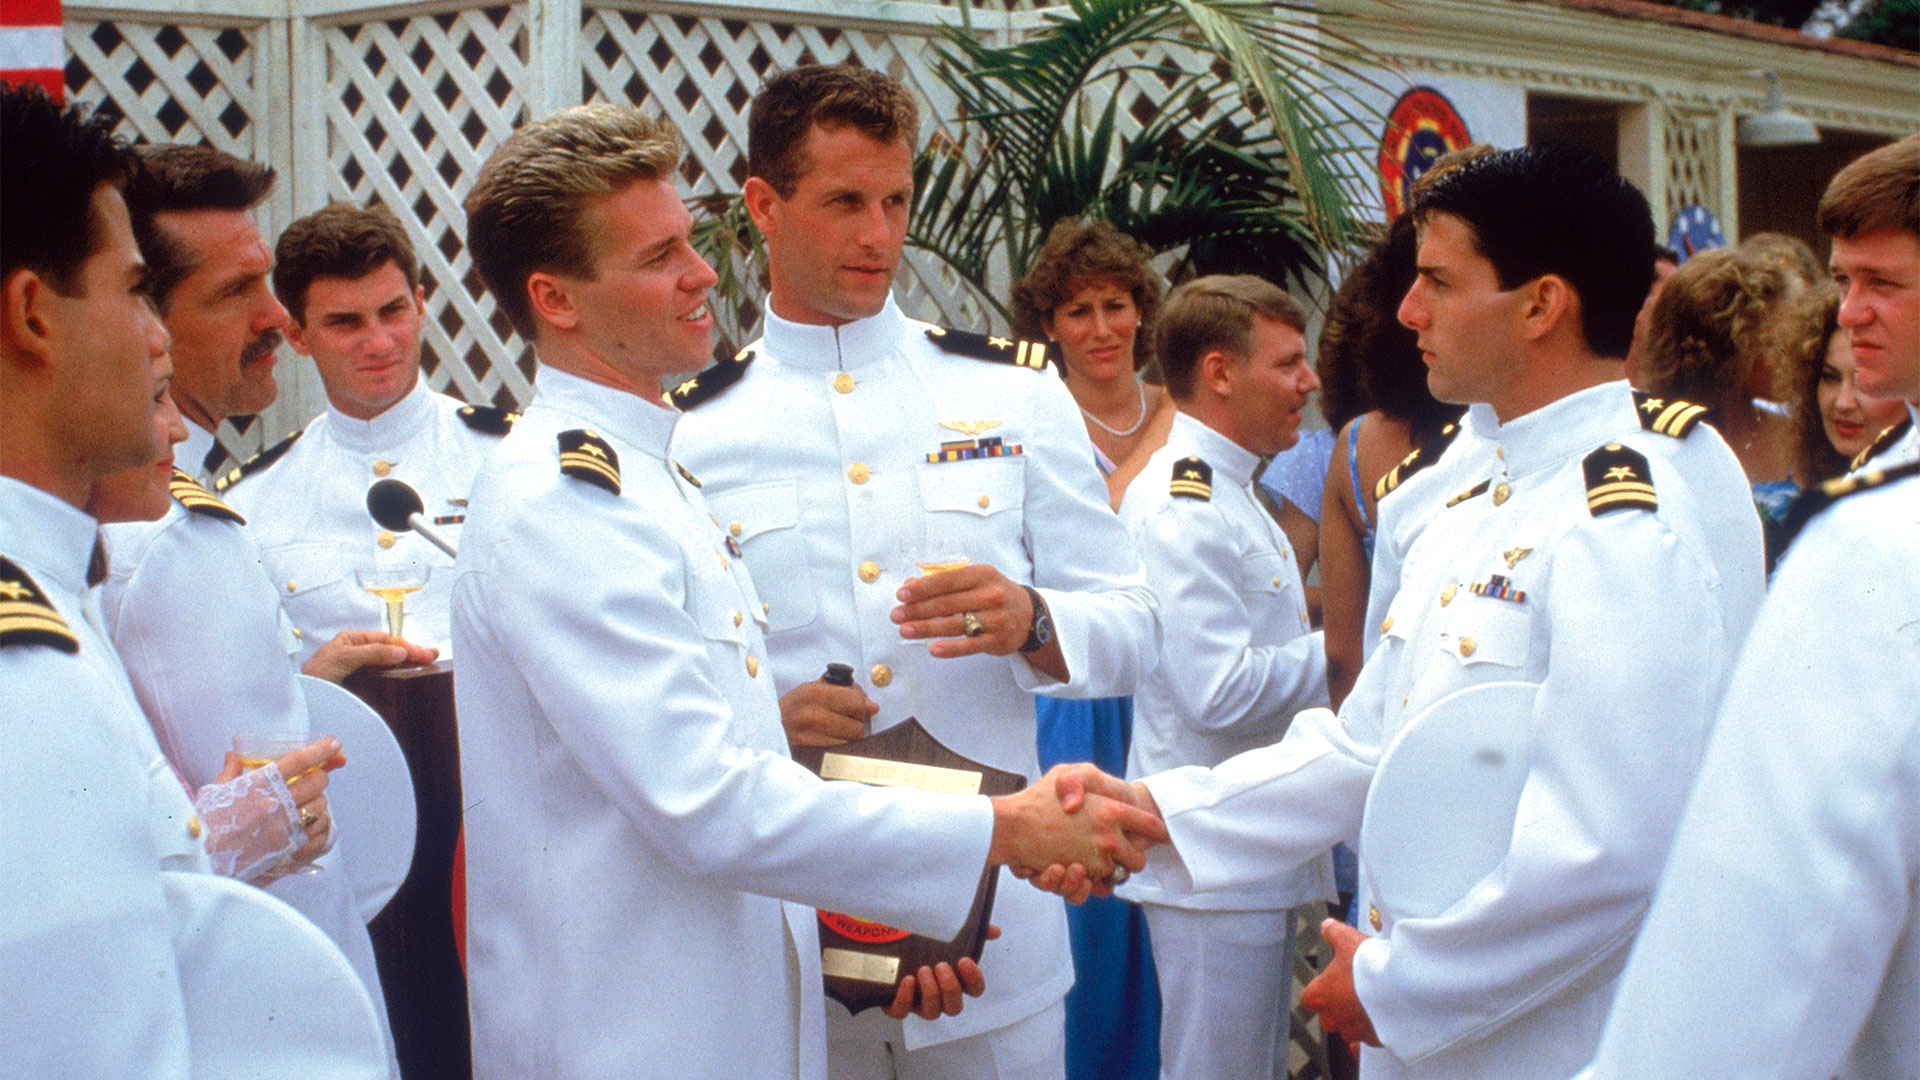 The United States Navy collaborated with the making of the film.  (Paramount)